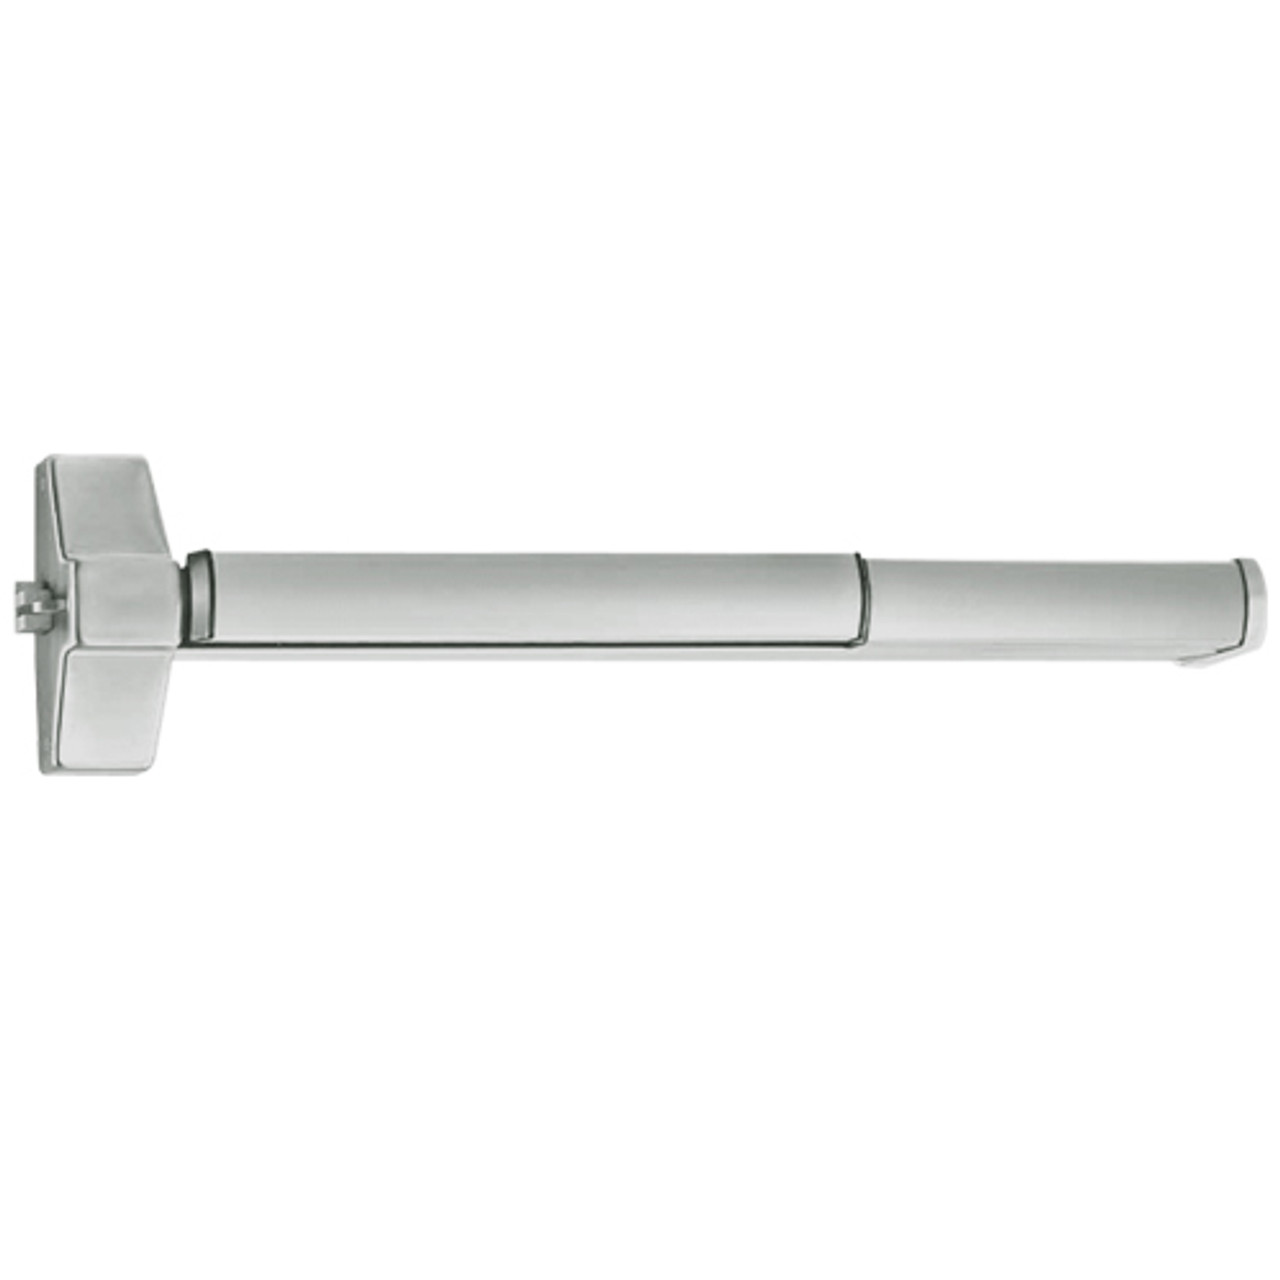 ED5200SA-619-M61 Corbin ED5200 Series Fire Rated Exit Device with Exit Alarm Device in Satin Nickel Finish